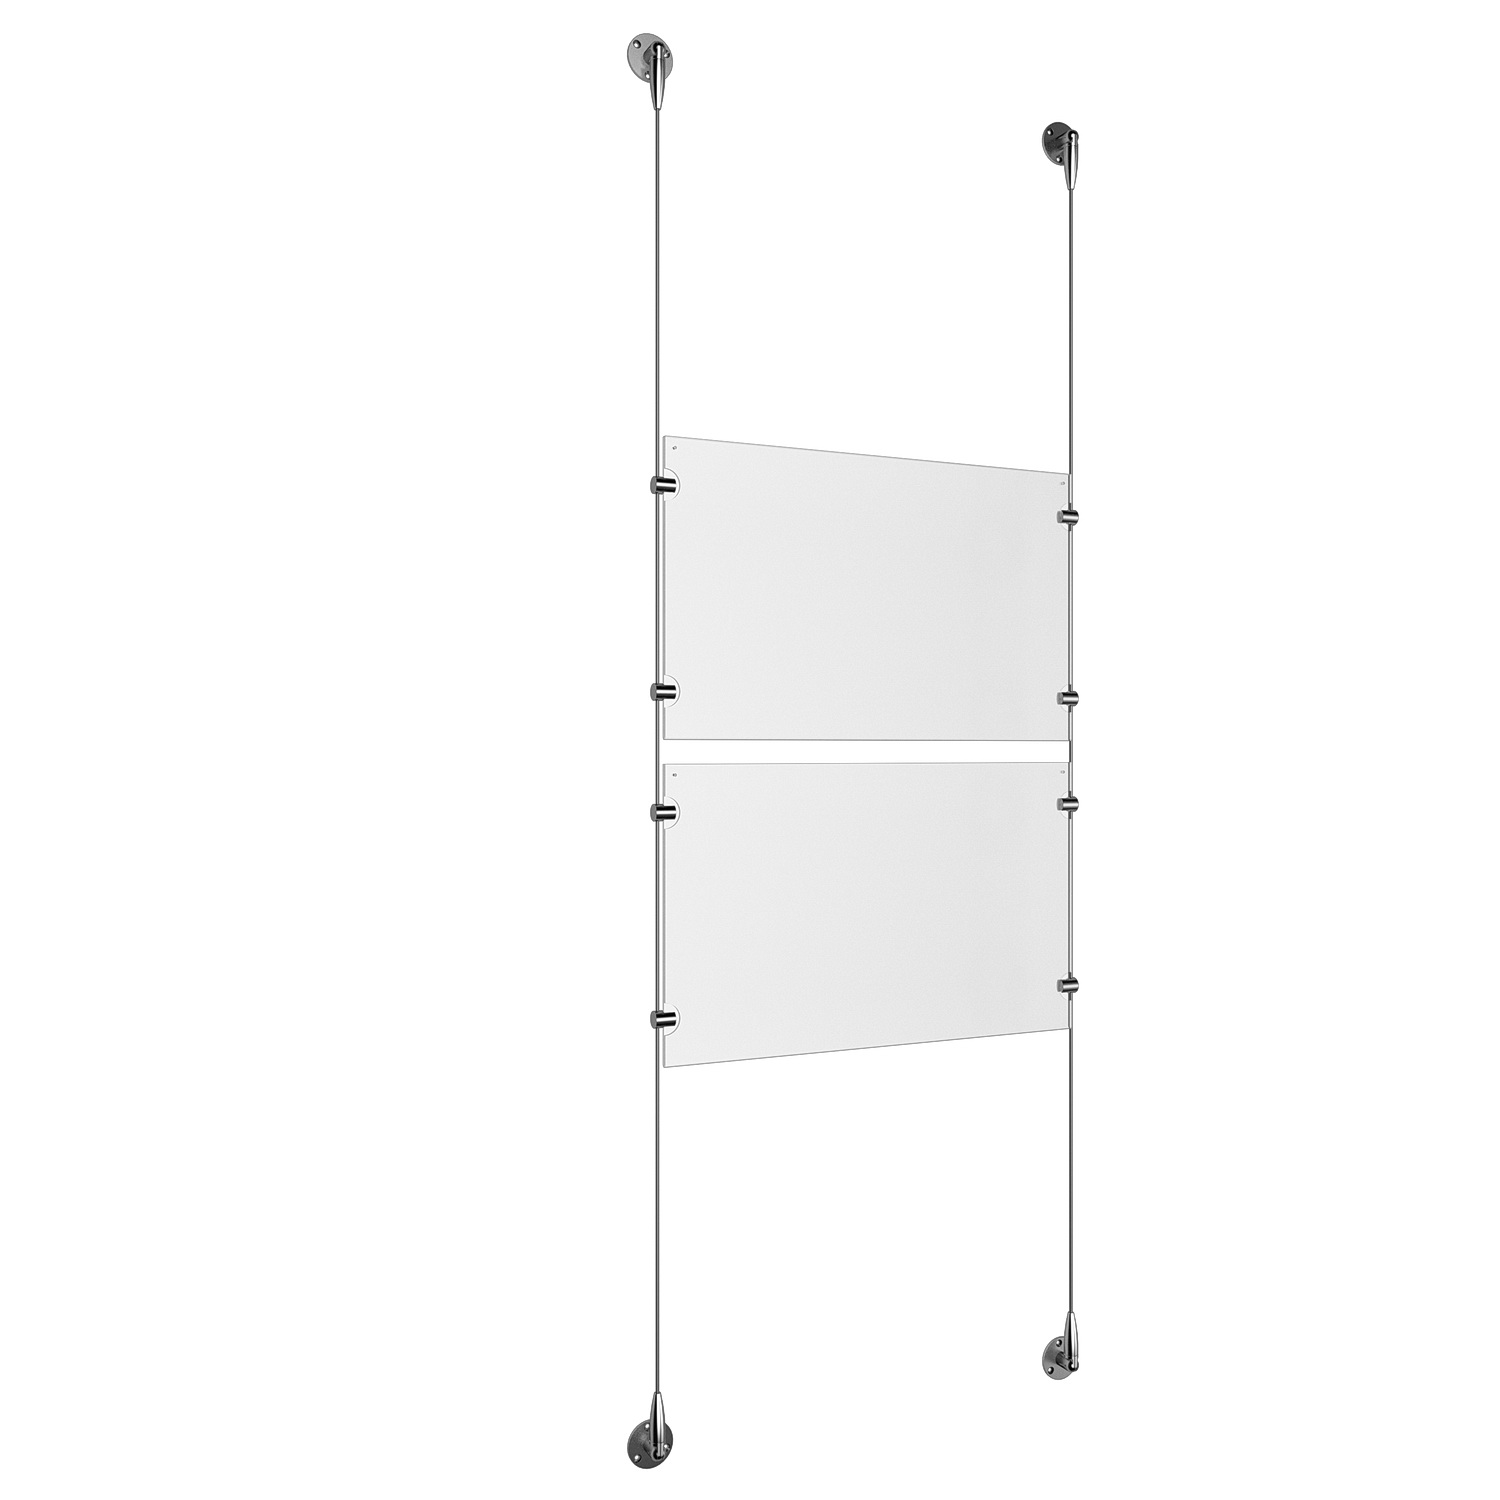 (2) 17'' Width x 11'' Height Clear Acrylic Frame & (2) Stainless Steel Satin Brushed Adjustable Angle Signature 1/8'' Cable Systems with (8) Single-Sided Panel Grippers